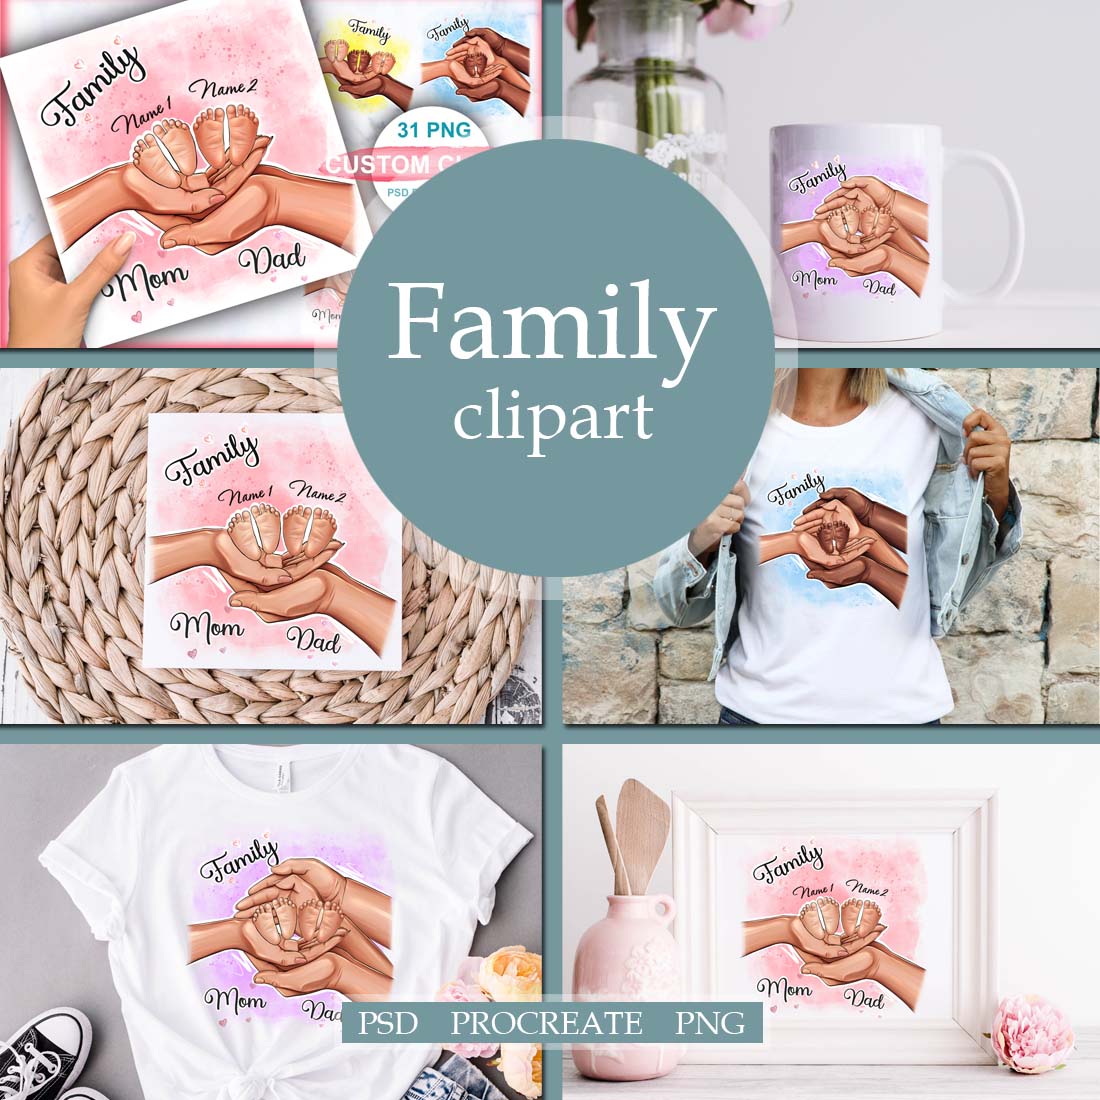 Family Clipart, Mom, Dad and Kids cover image.